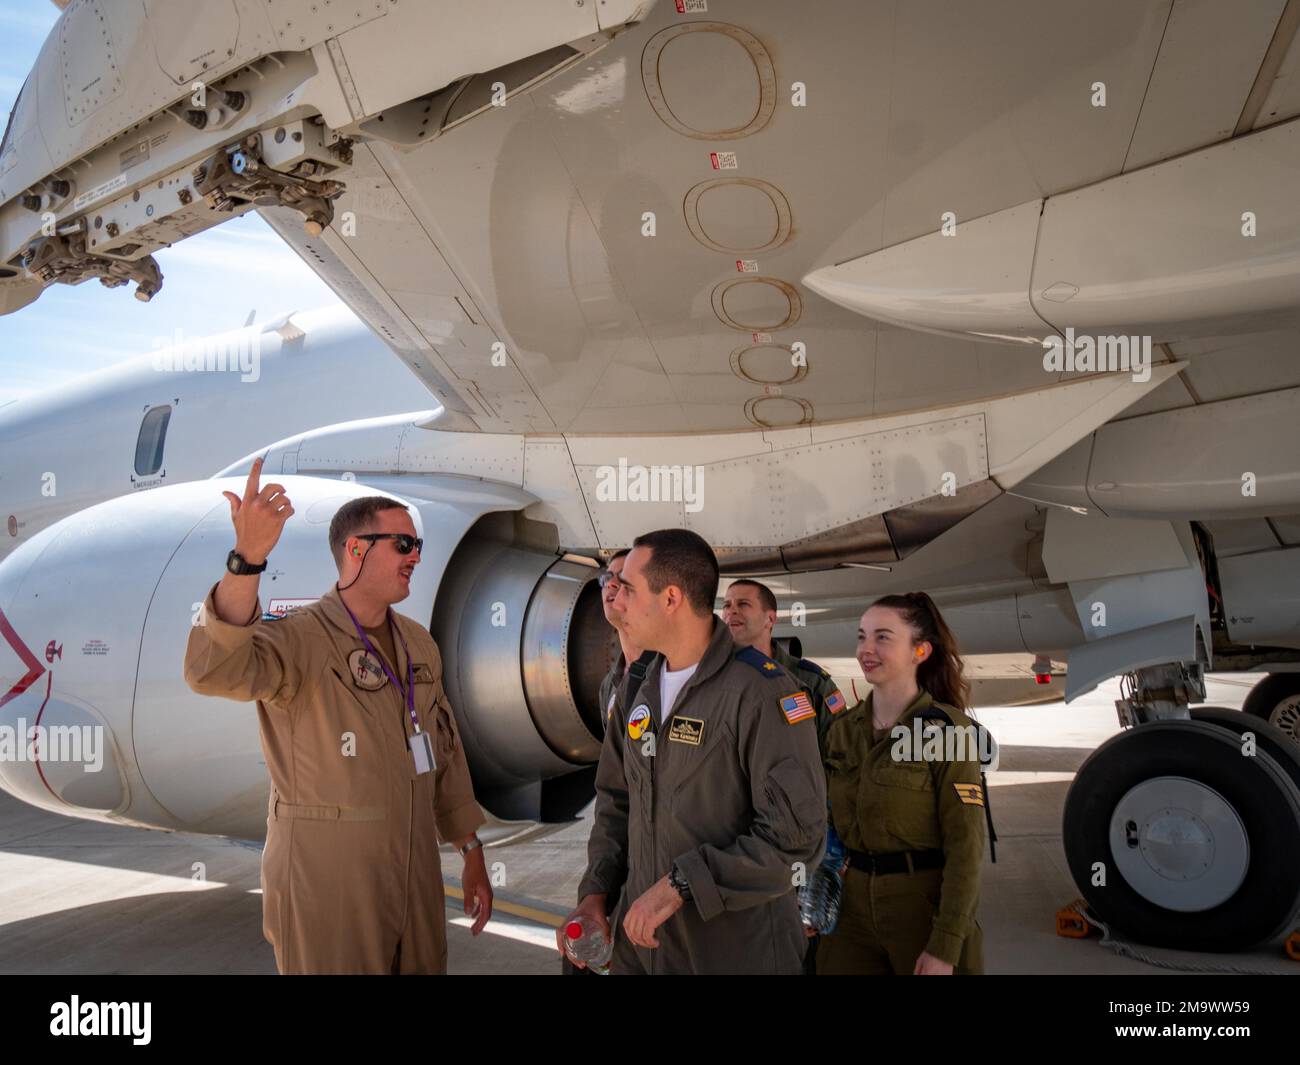 220520-N-VH871-1254 OVDA AIR FORCE BASE, Israel (May 20, 2022) Lt. Josh Schuh, assigned to the 'Grey Knights' of Patrol Squadron (VP) 46, deployed with Commander, Task Force (CTF) 57, conducts a tour of a P-8A maritime patrol aircraft to members of the Israeli Navy, May 20. CTF 57 aircraft conduct missions in support of maritime operations to ensure security and stability in the Middle East region. Stock Photo